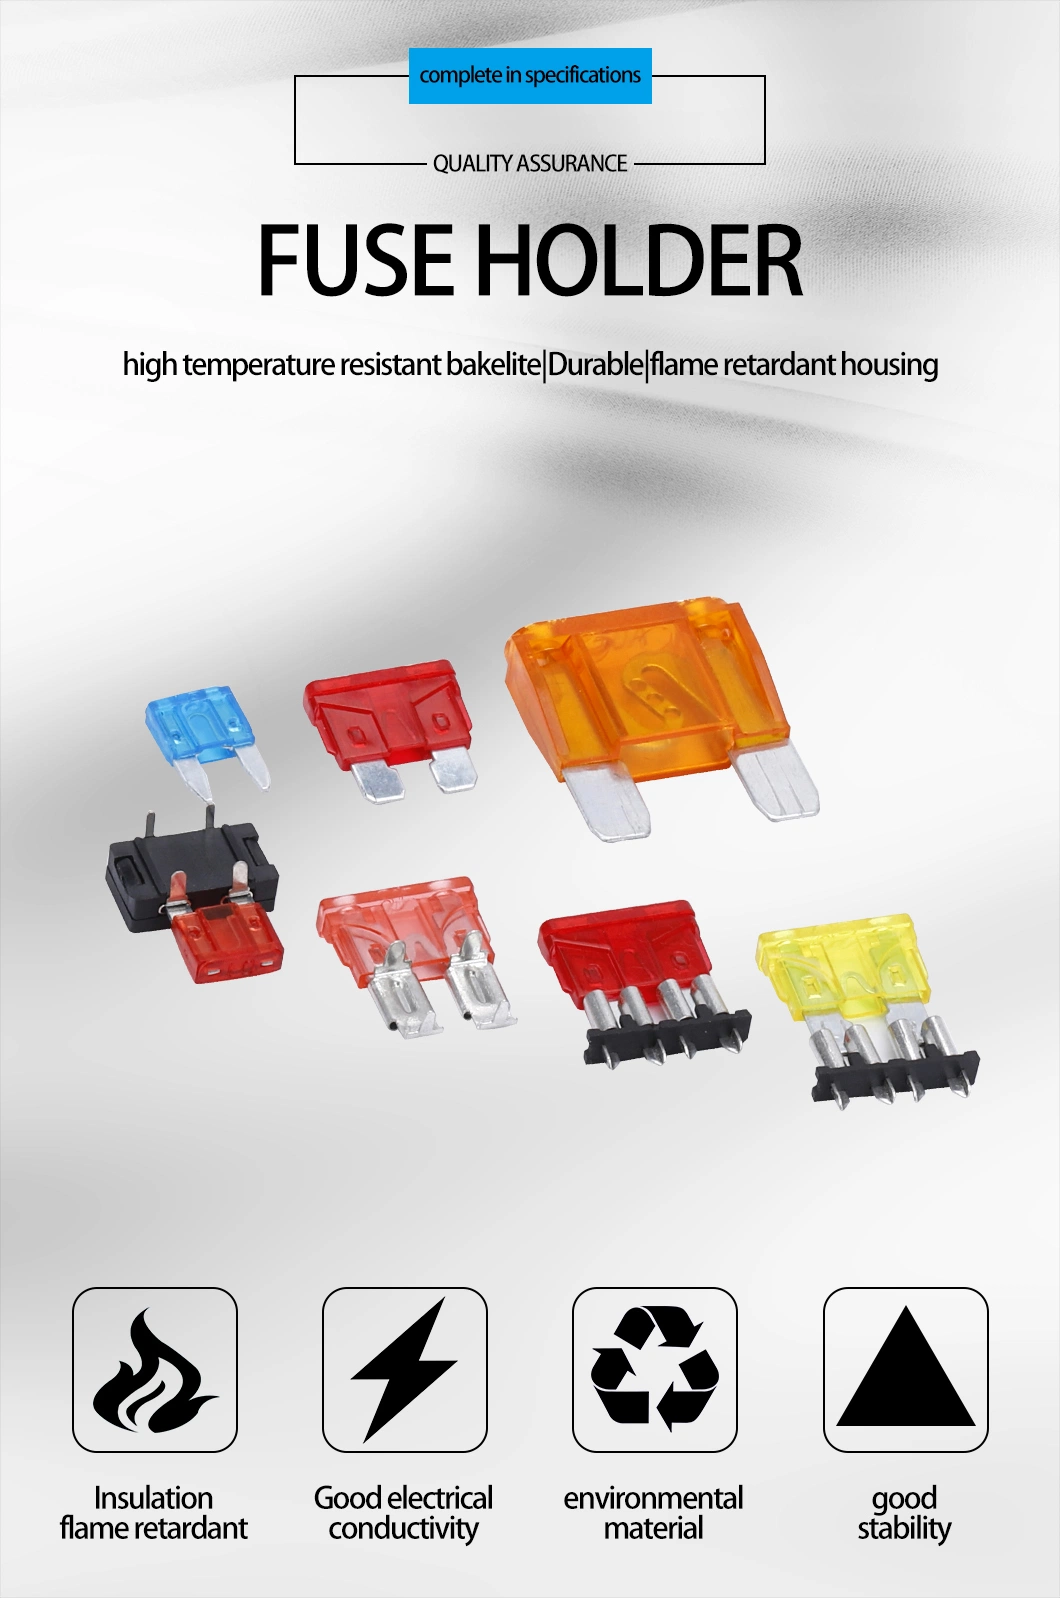 10 Gauge Fuse Holder Atc/ATO, in-Line Automotive Blade Fuse Holder with Standard Car Fuses, 15A 20A 25A 30A 35A 40A Automotive Replacement Fuses